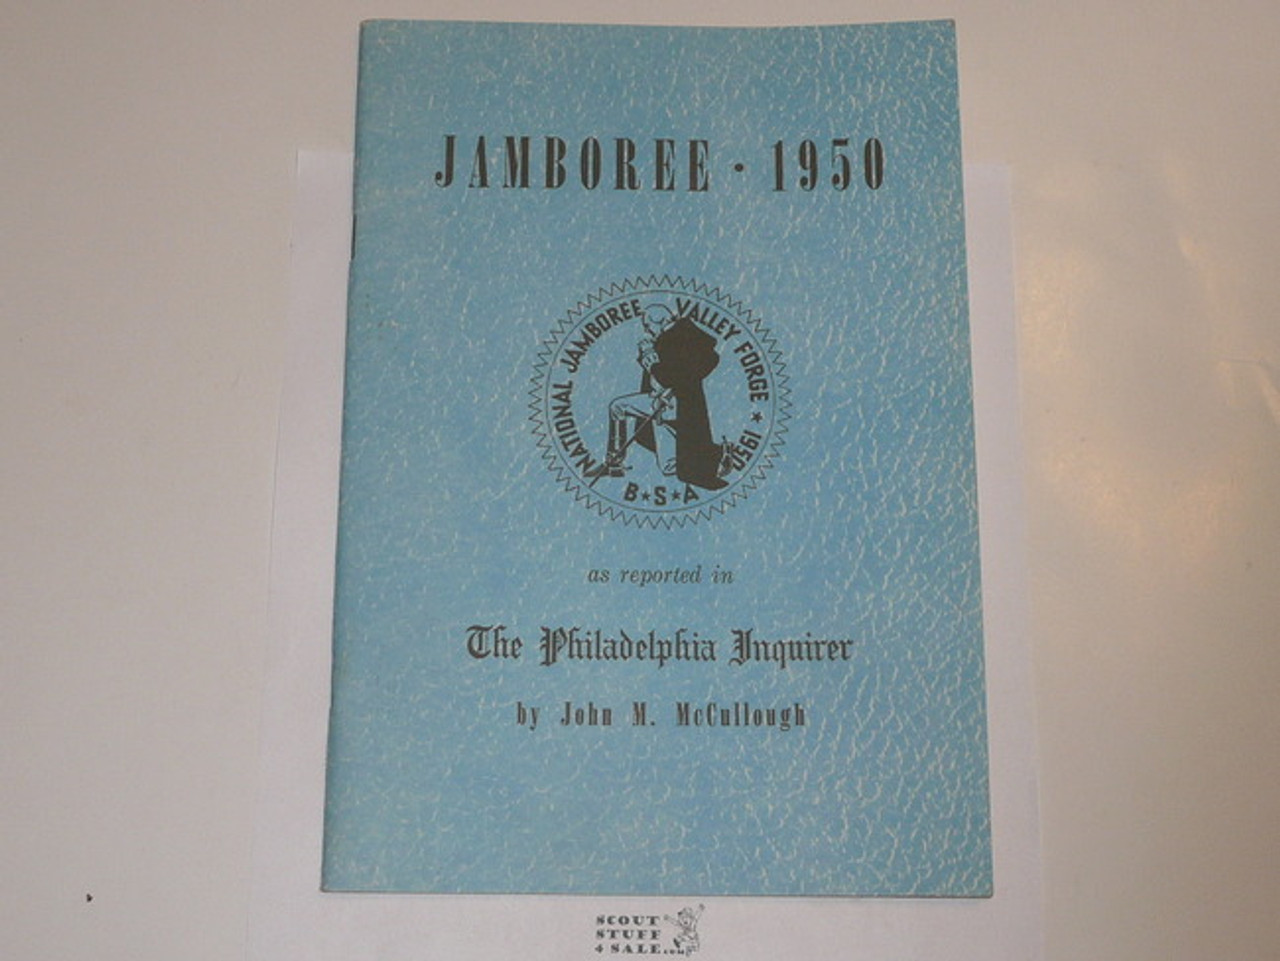 1950 National Jamboree Reprints of Articles From the Philadelphia Inquirer, Lots of Pictures and Great Articles